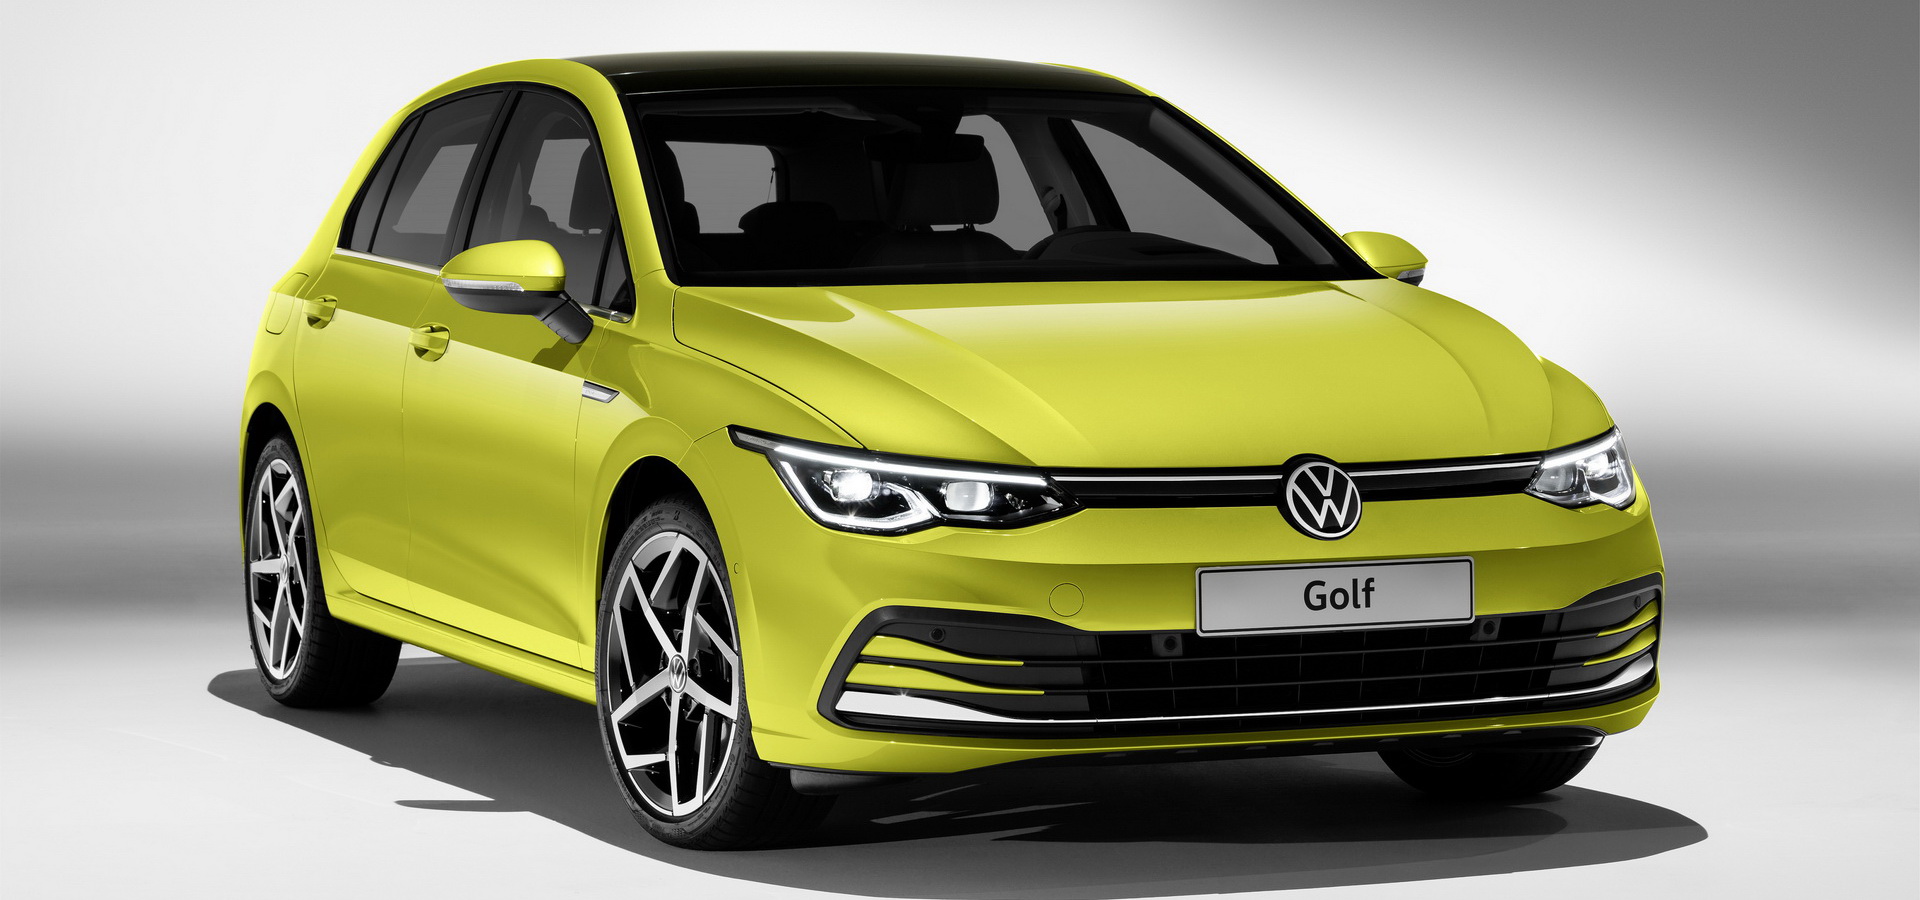 Vw Golf Here Are All The Details From Design To Engines And Tech Plus Images Carscoops